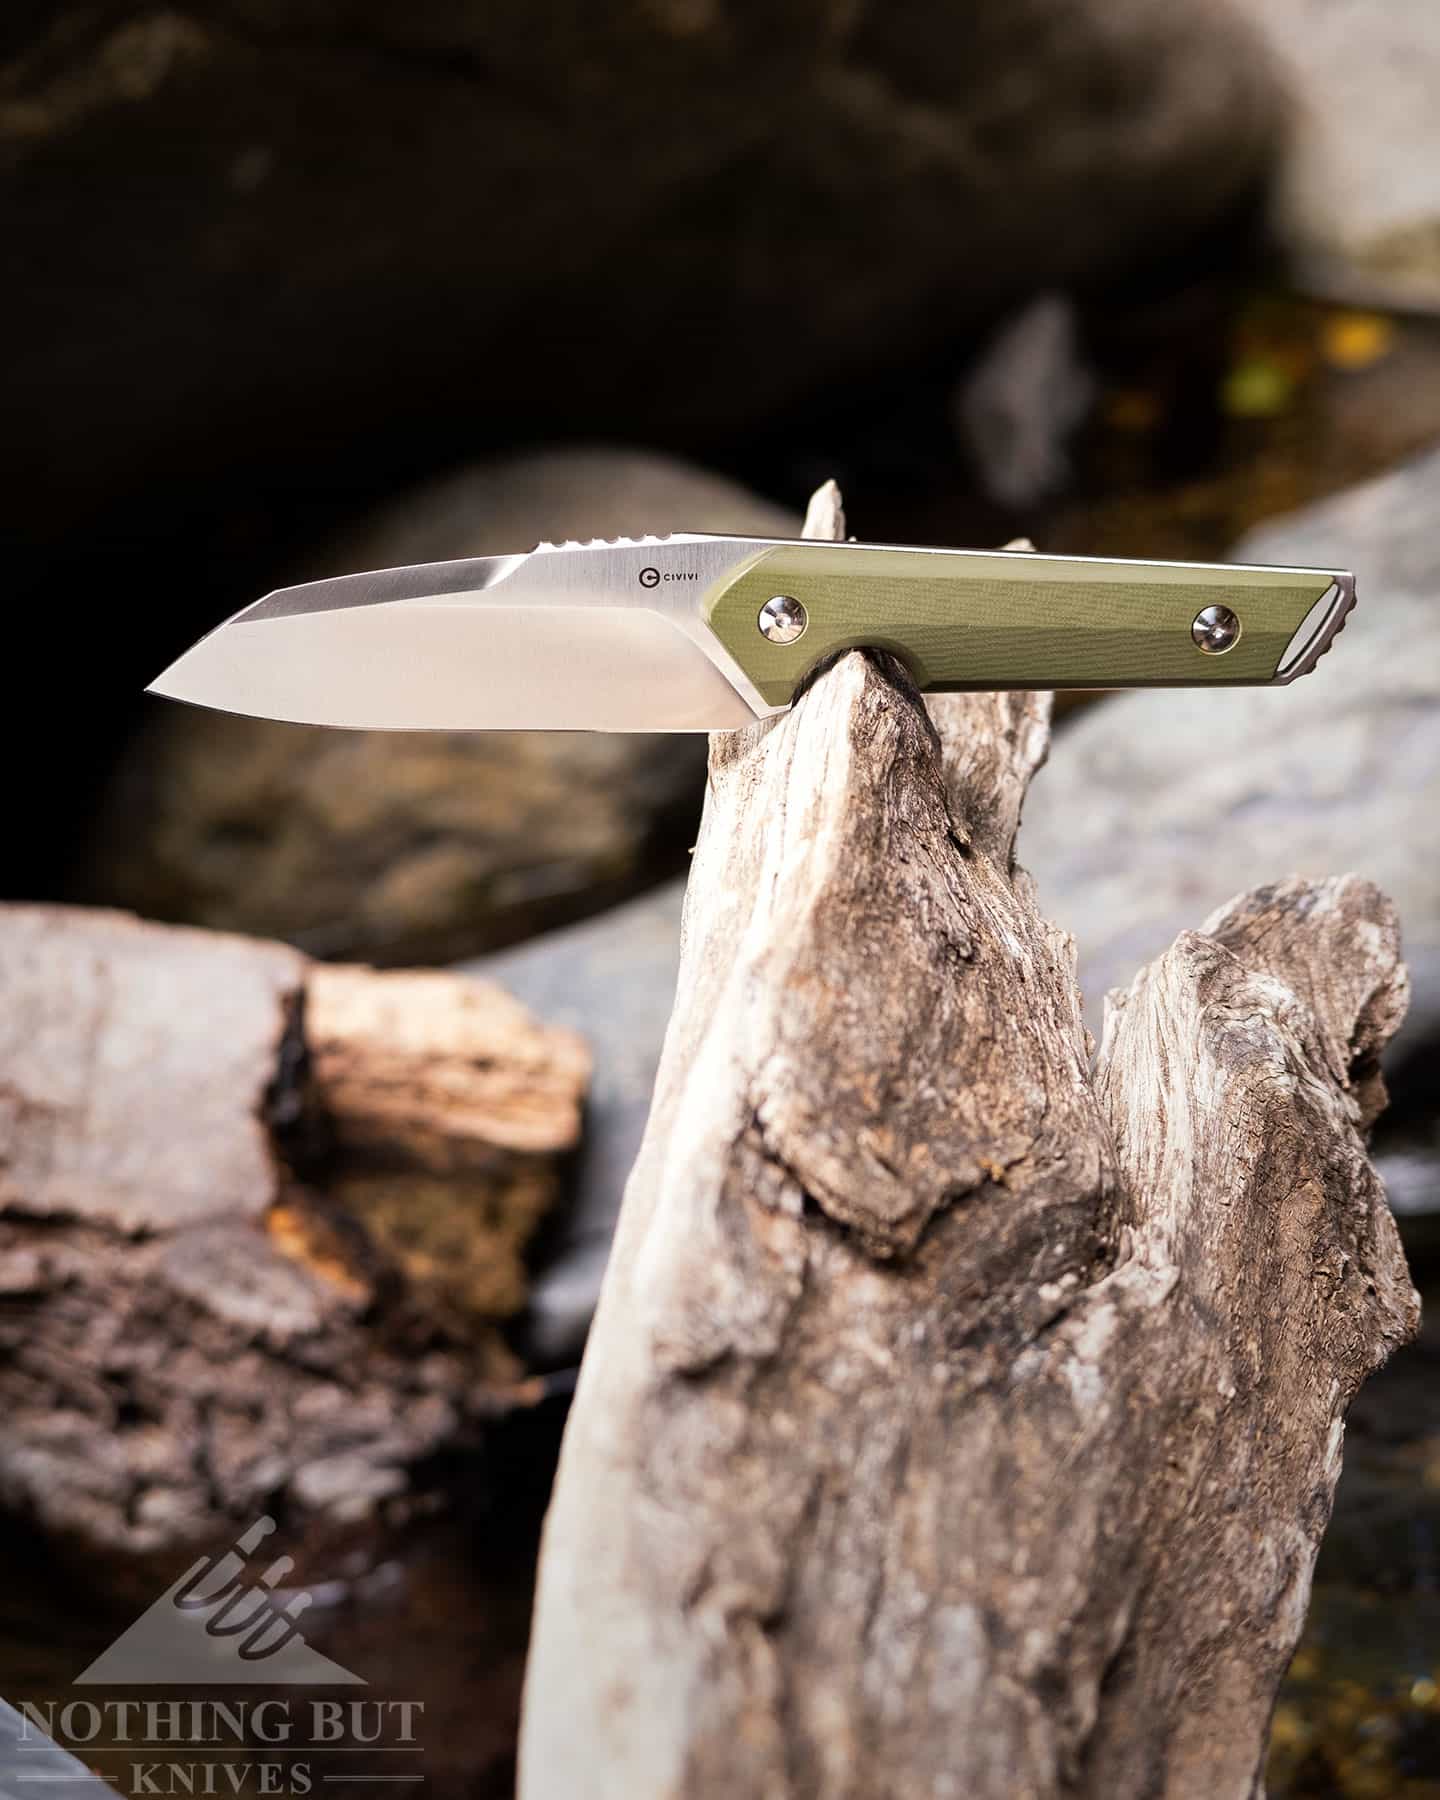 The Civivi Kepler outdoors on a piece of driftwood.